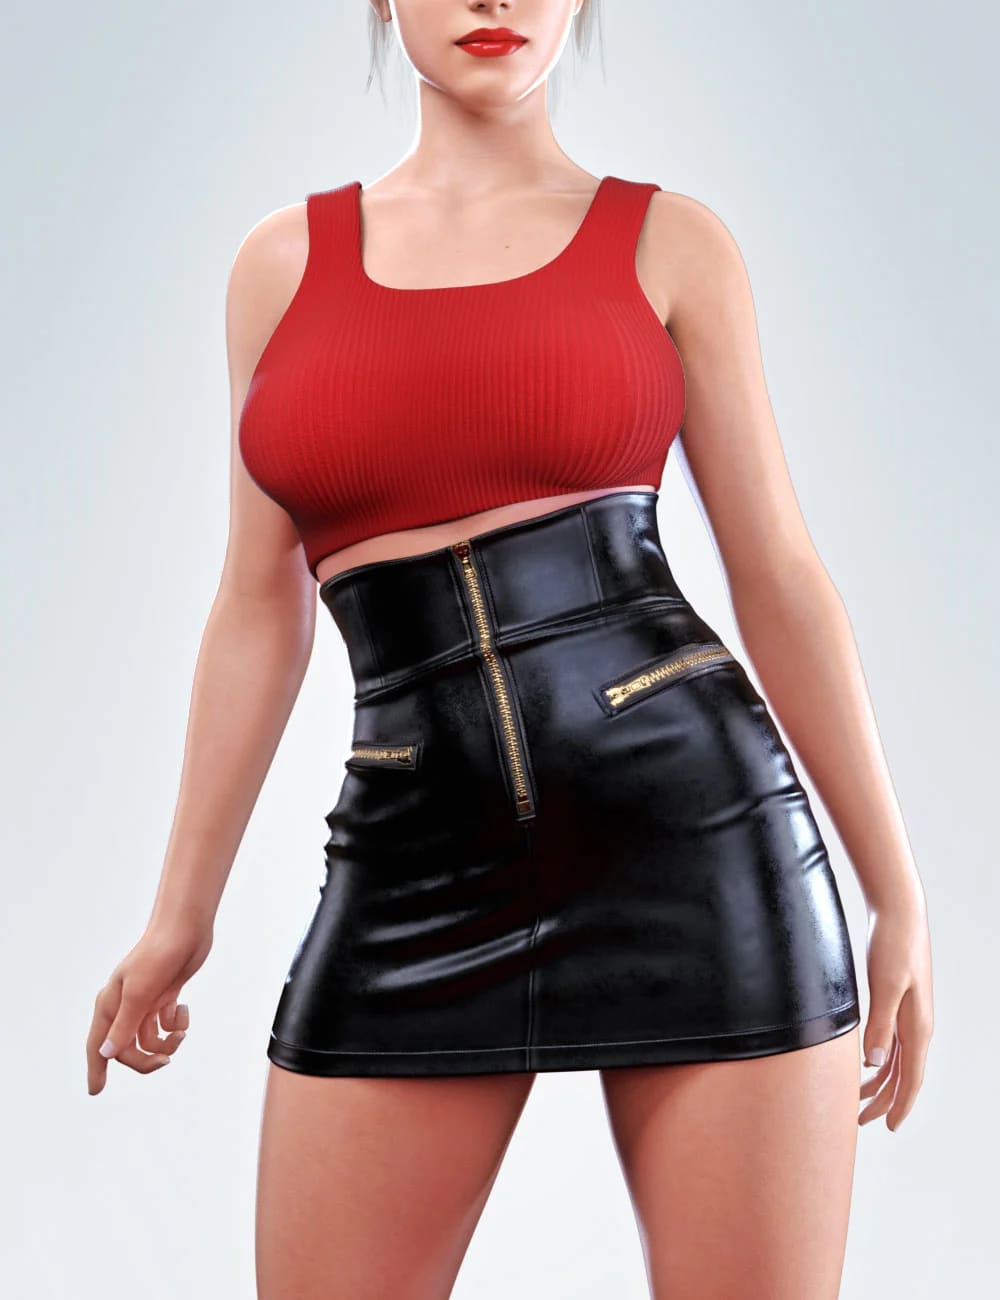 dForce COG Crop Top With Leather Skirt for Genesis 8 and 8.1 Females_DAZ3DDL